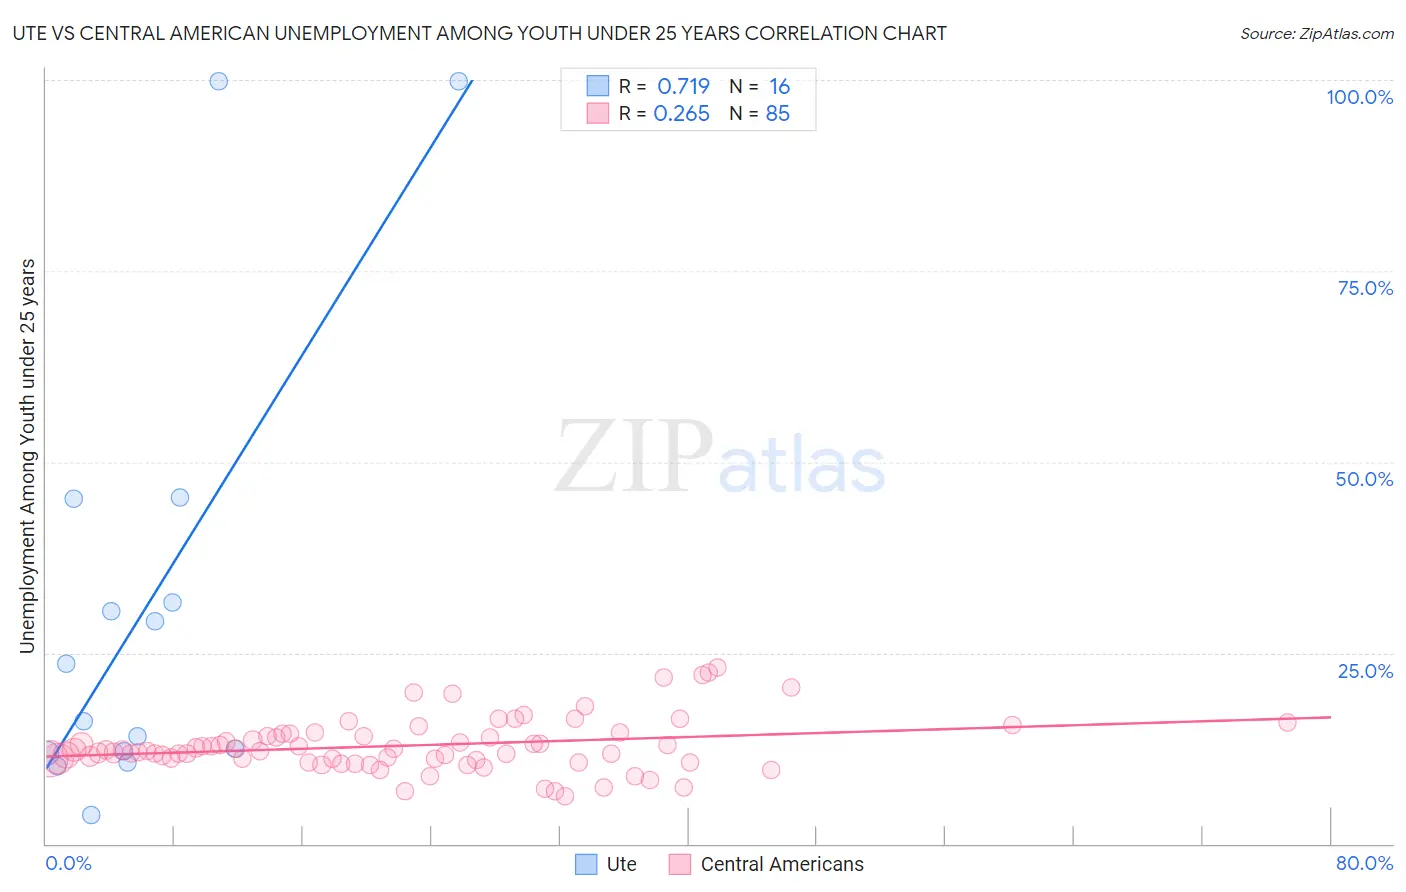 Ute vs Central American Unemployment Among Youth under 25 years